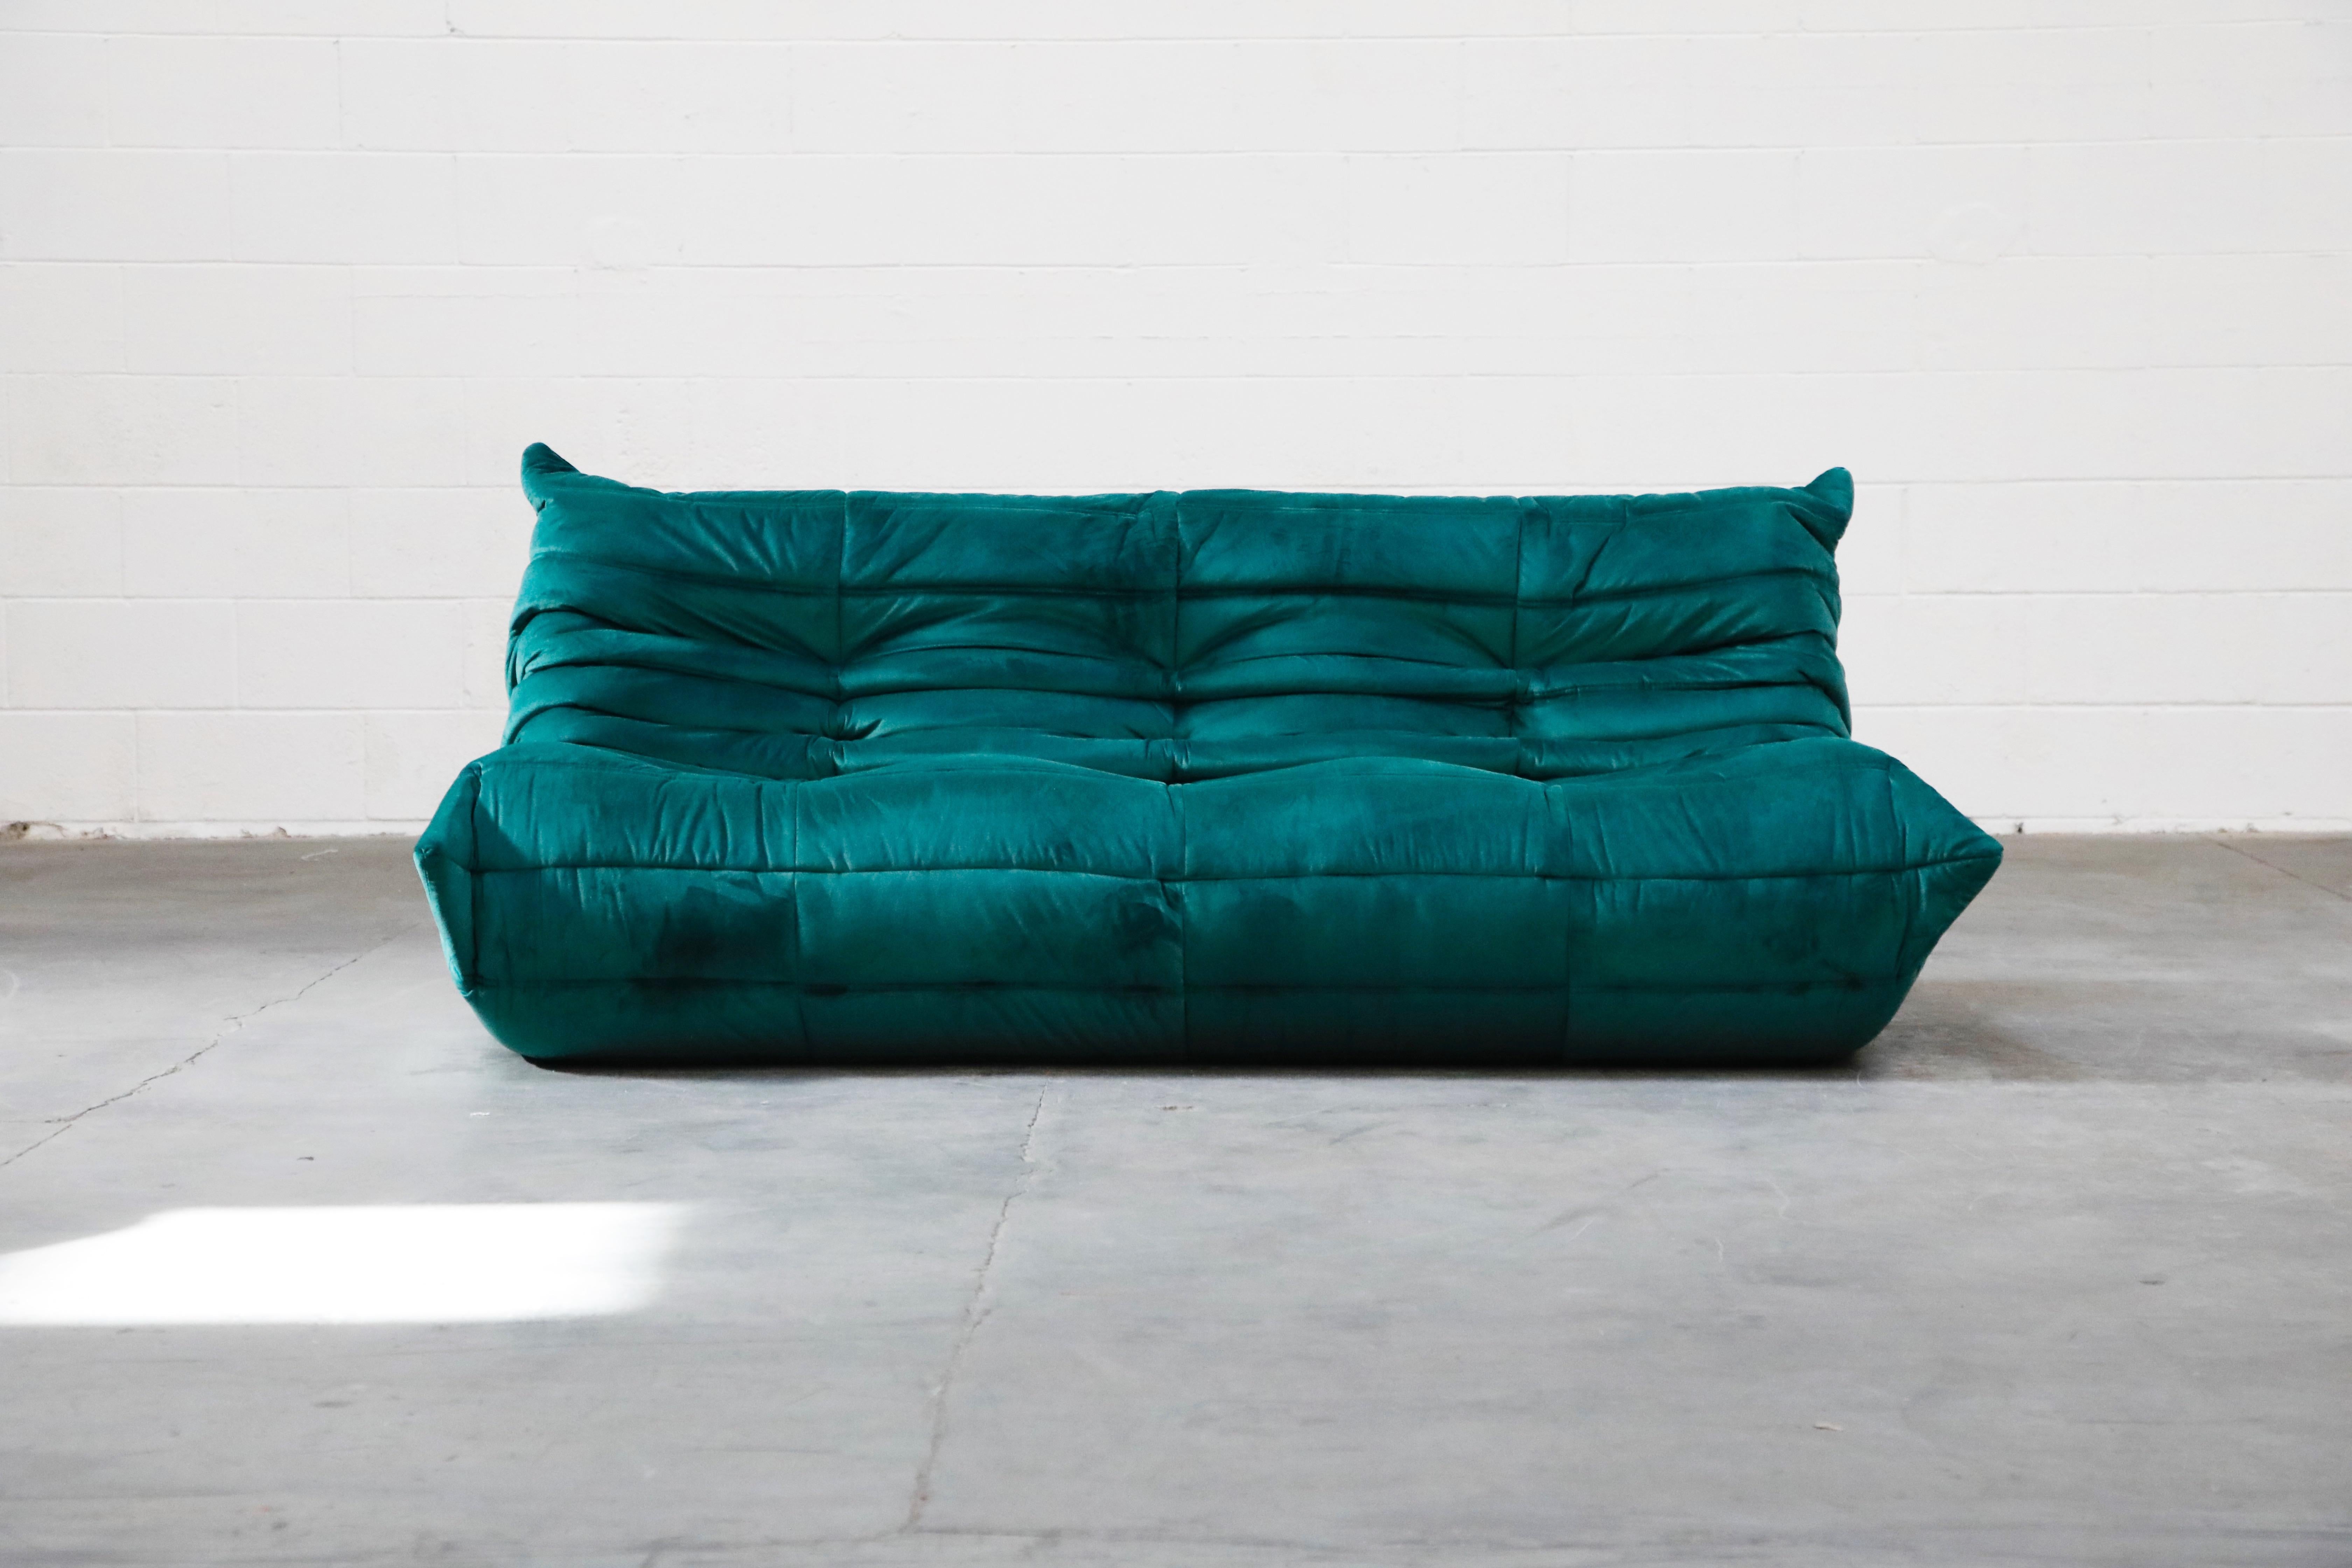 This incredible 'Togo' three-seat sofa was designed by Michel Ducaroy in 1973 for Ligne Roset, France. This Togo sofa was completely restored with new high grade velvet upholstery in a mesmerizing Emerald Green color, and bottom decking fabric has